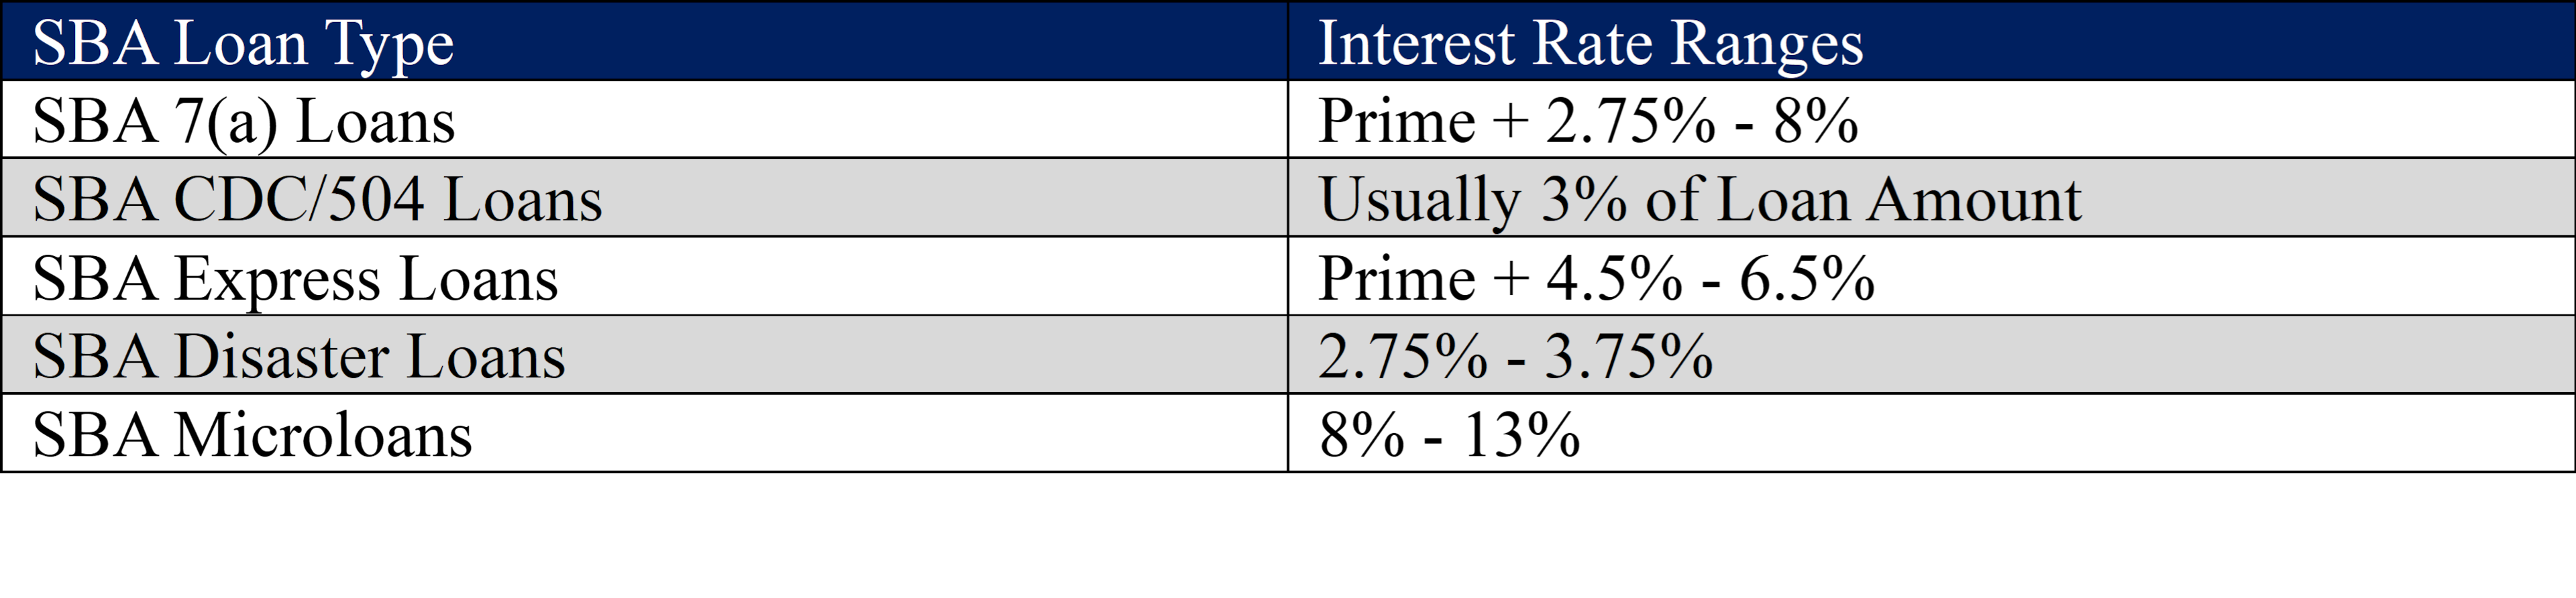 SBA Interest Rate Table, SBA loans, Small business administration